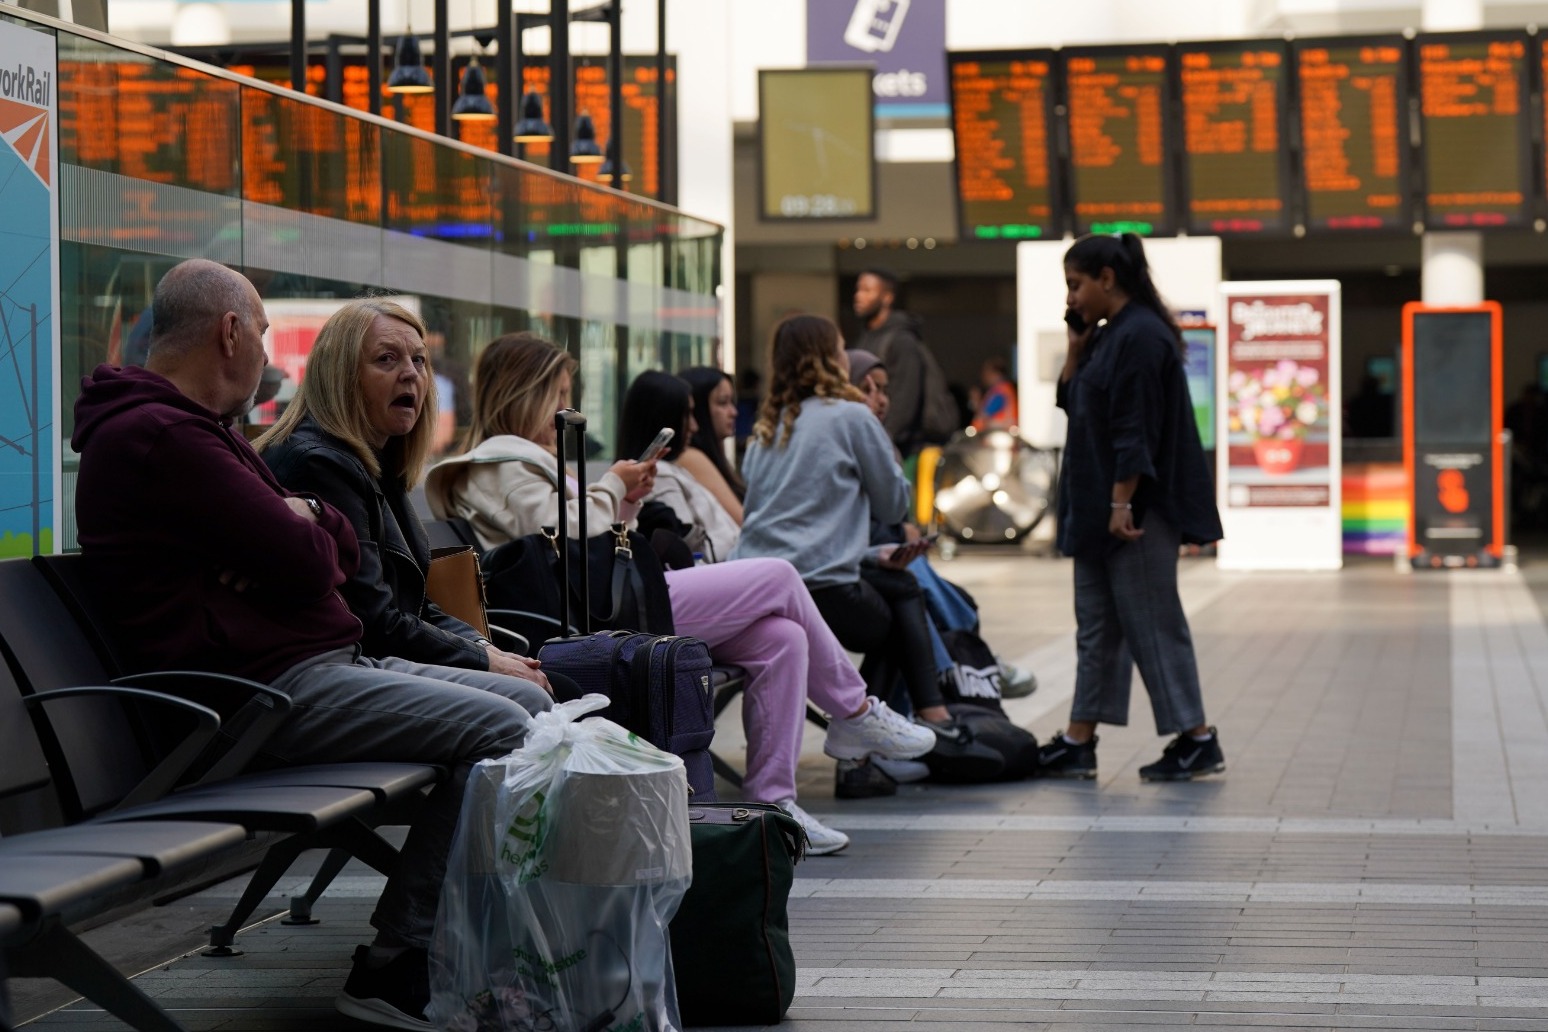 Disruptions to train services continue after 24 hour rail strike